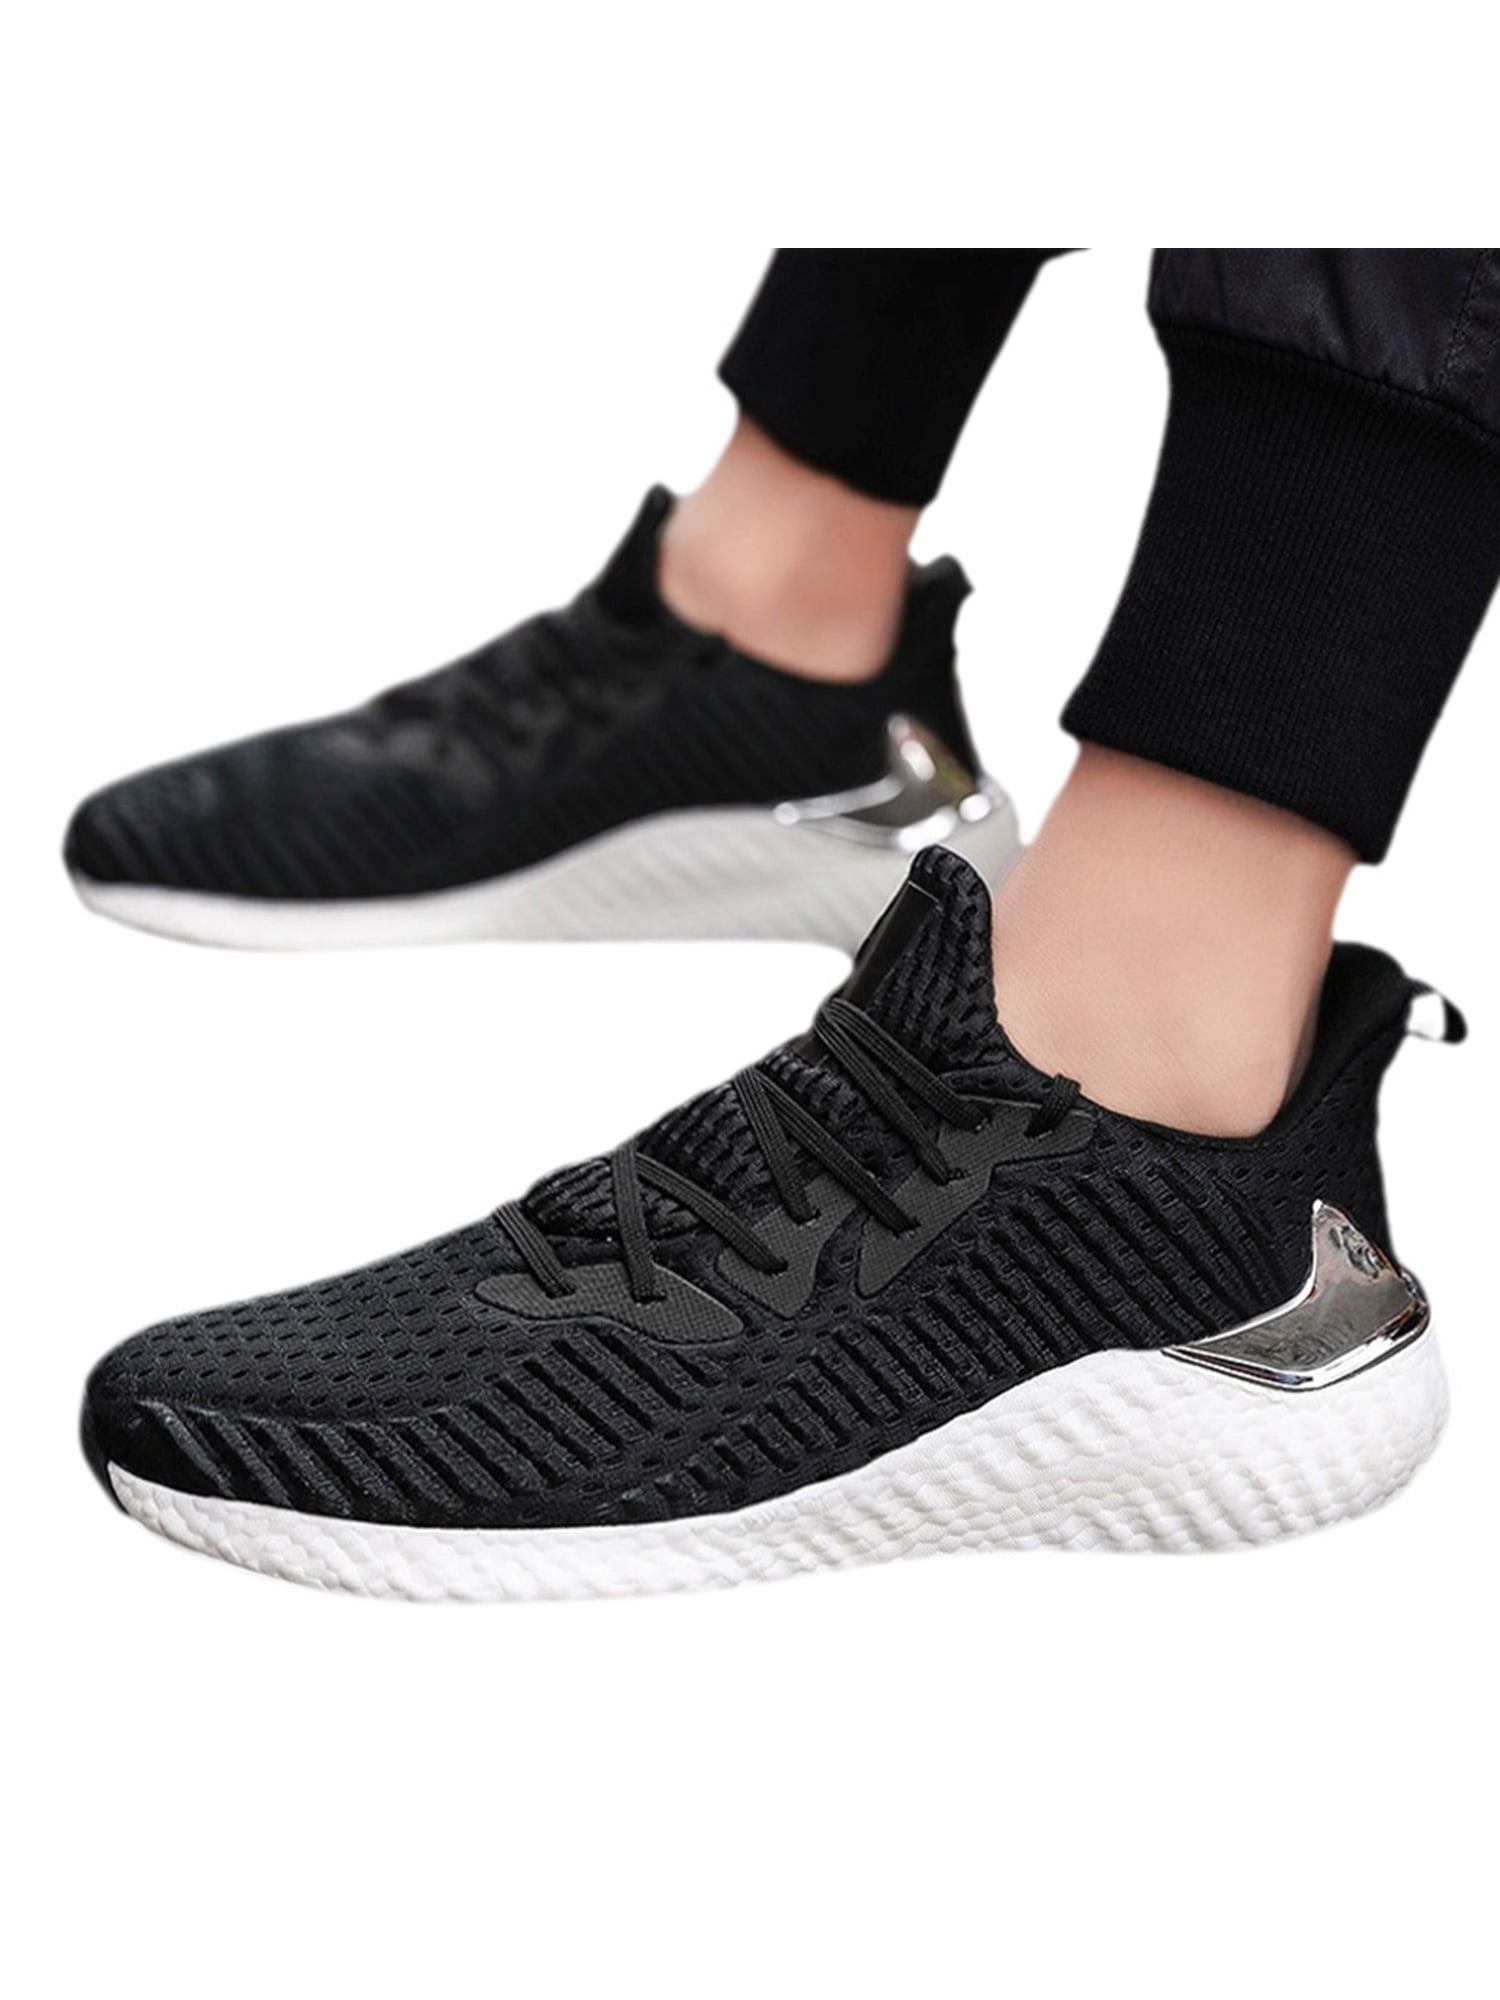 Mens Running Glasses Sheep Shoes Fashion Breathable Sneakers Mesh Soft Sole Casual Athletic Lightweight